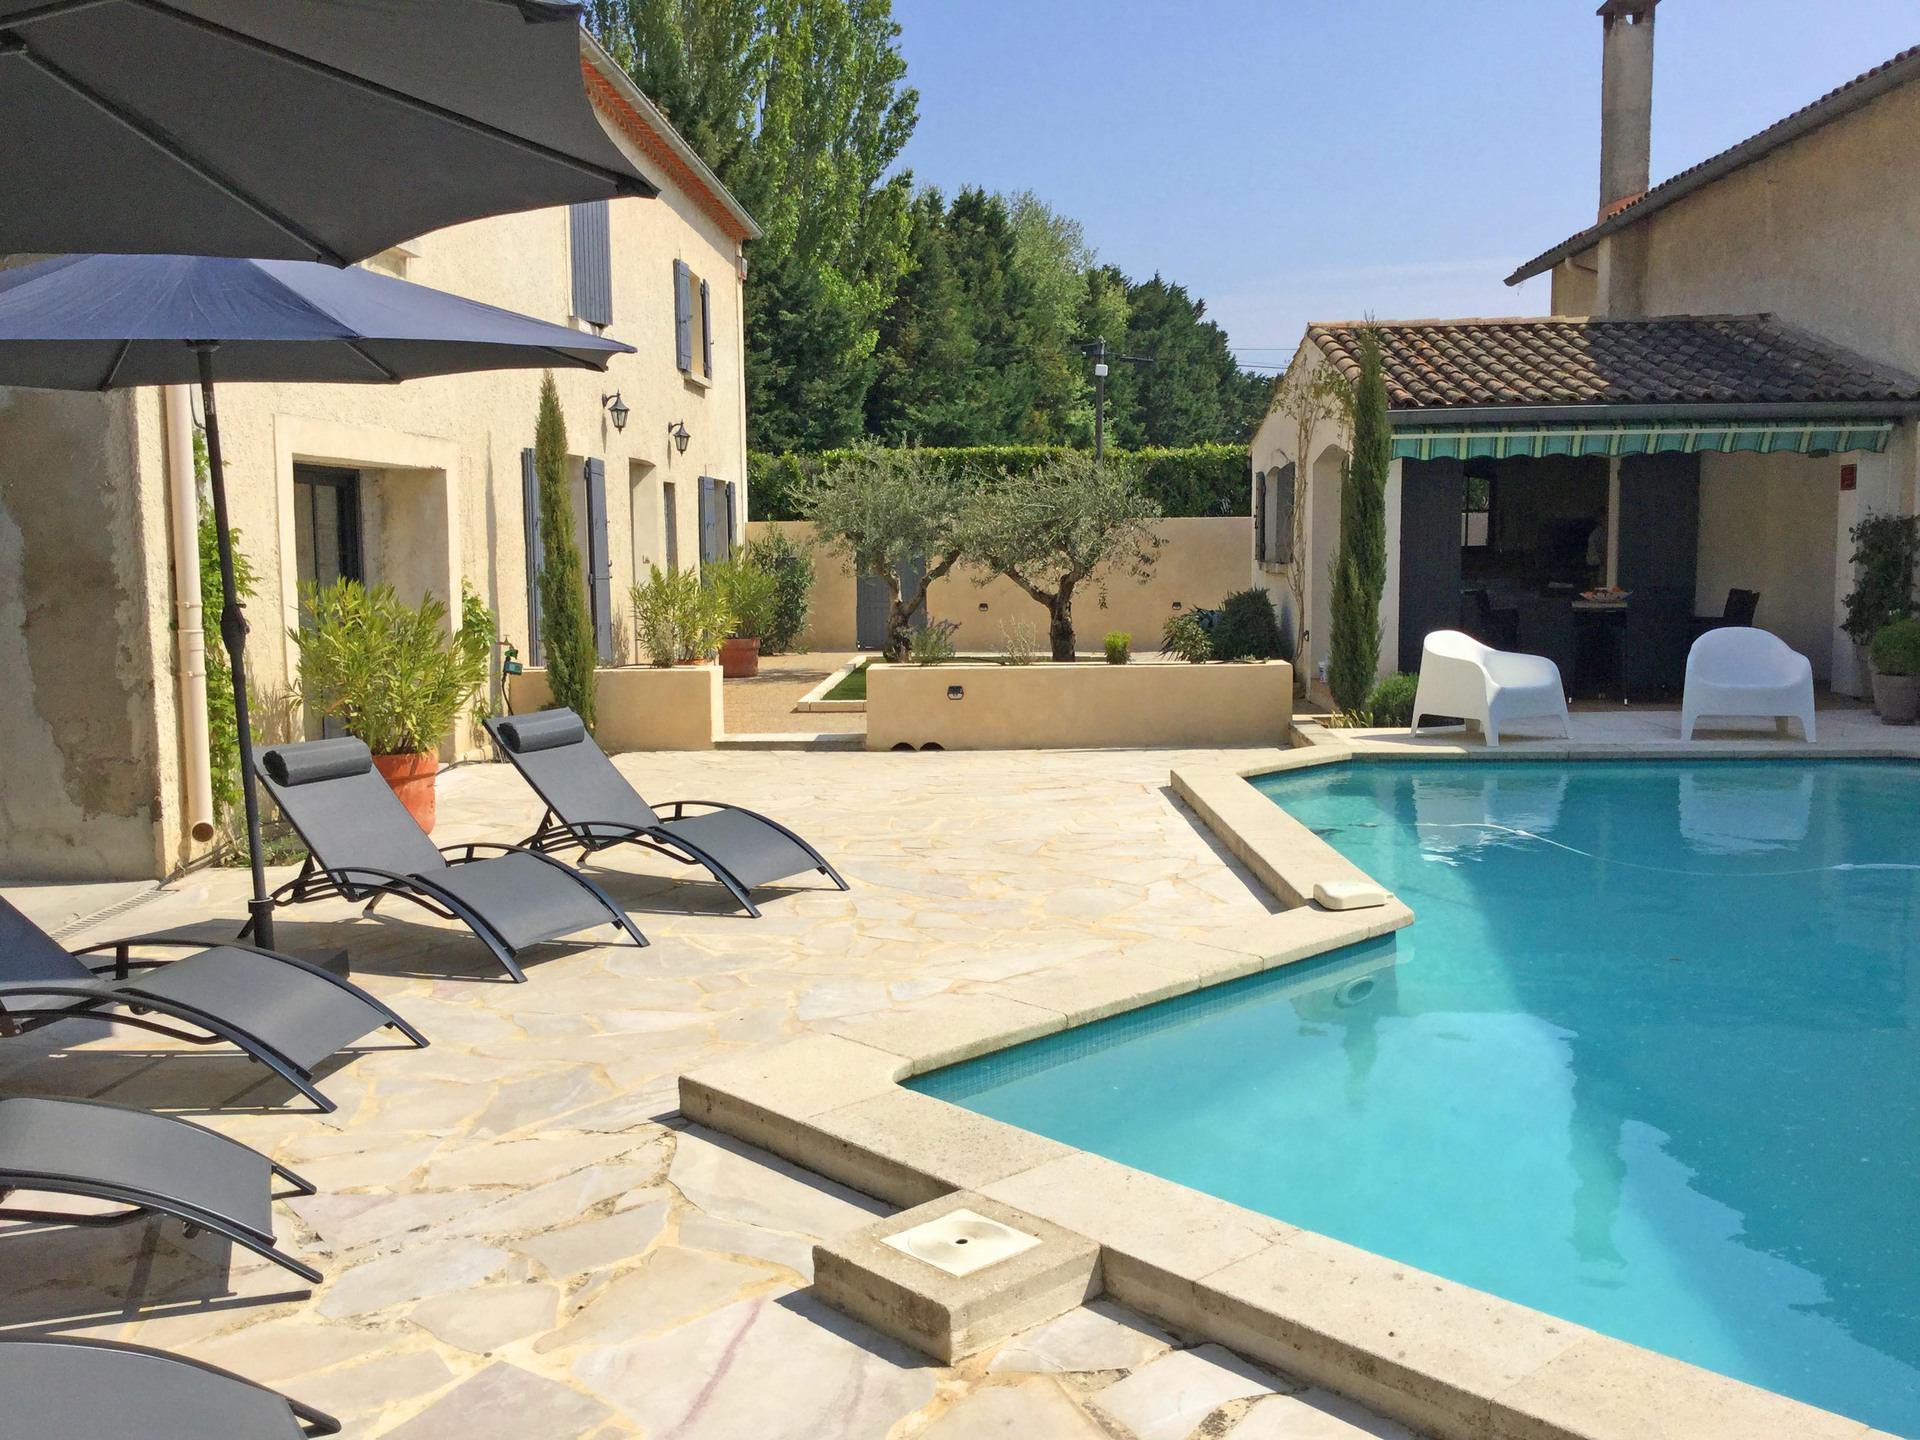 Property Image 2 - authentic provencal mas with pool, in the countryside of the village of sénas, close to the luberon and th